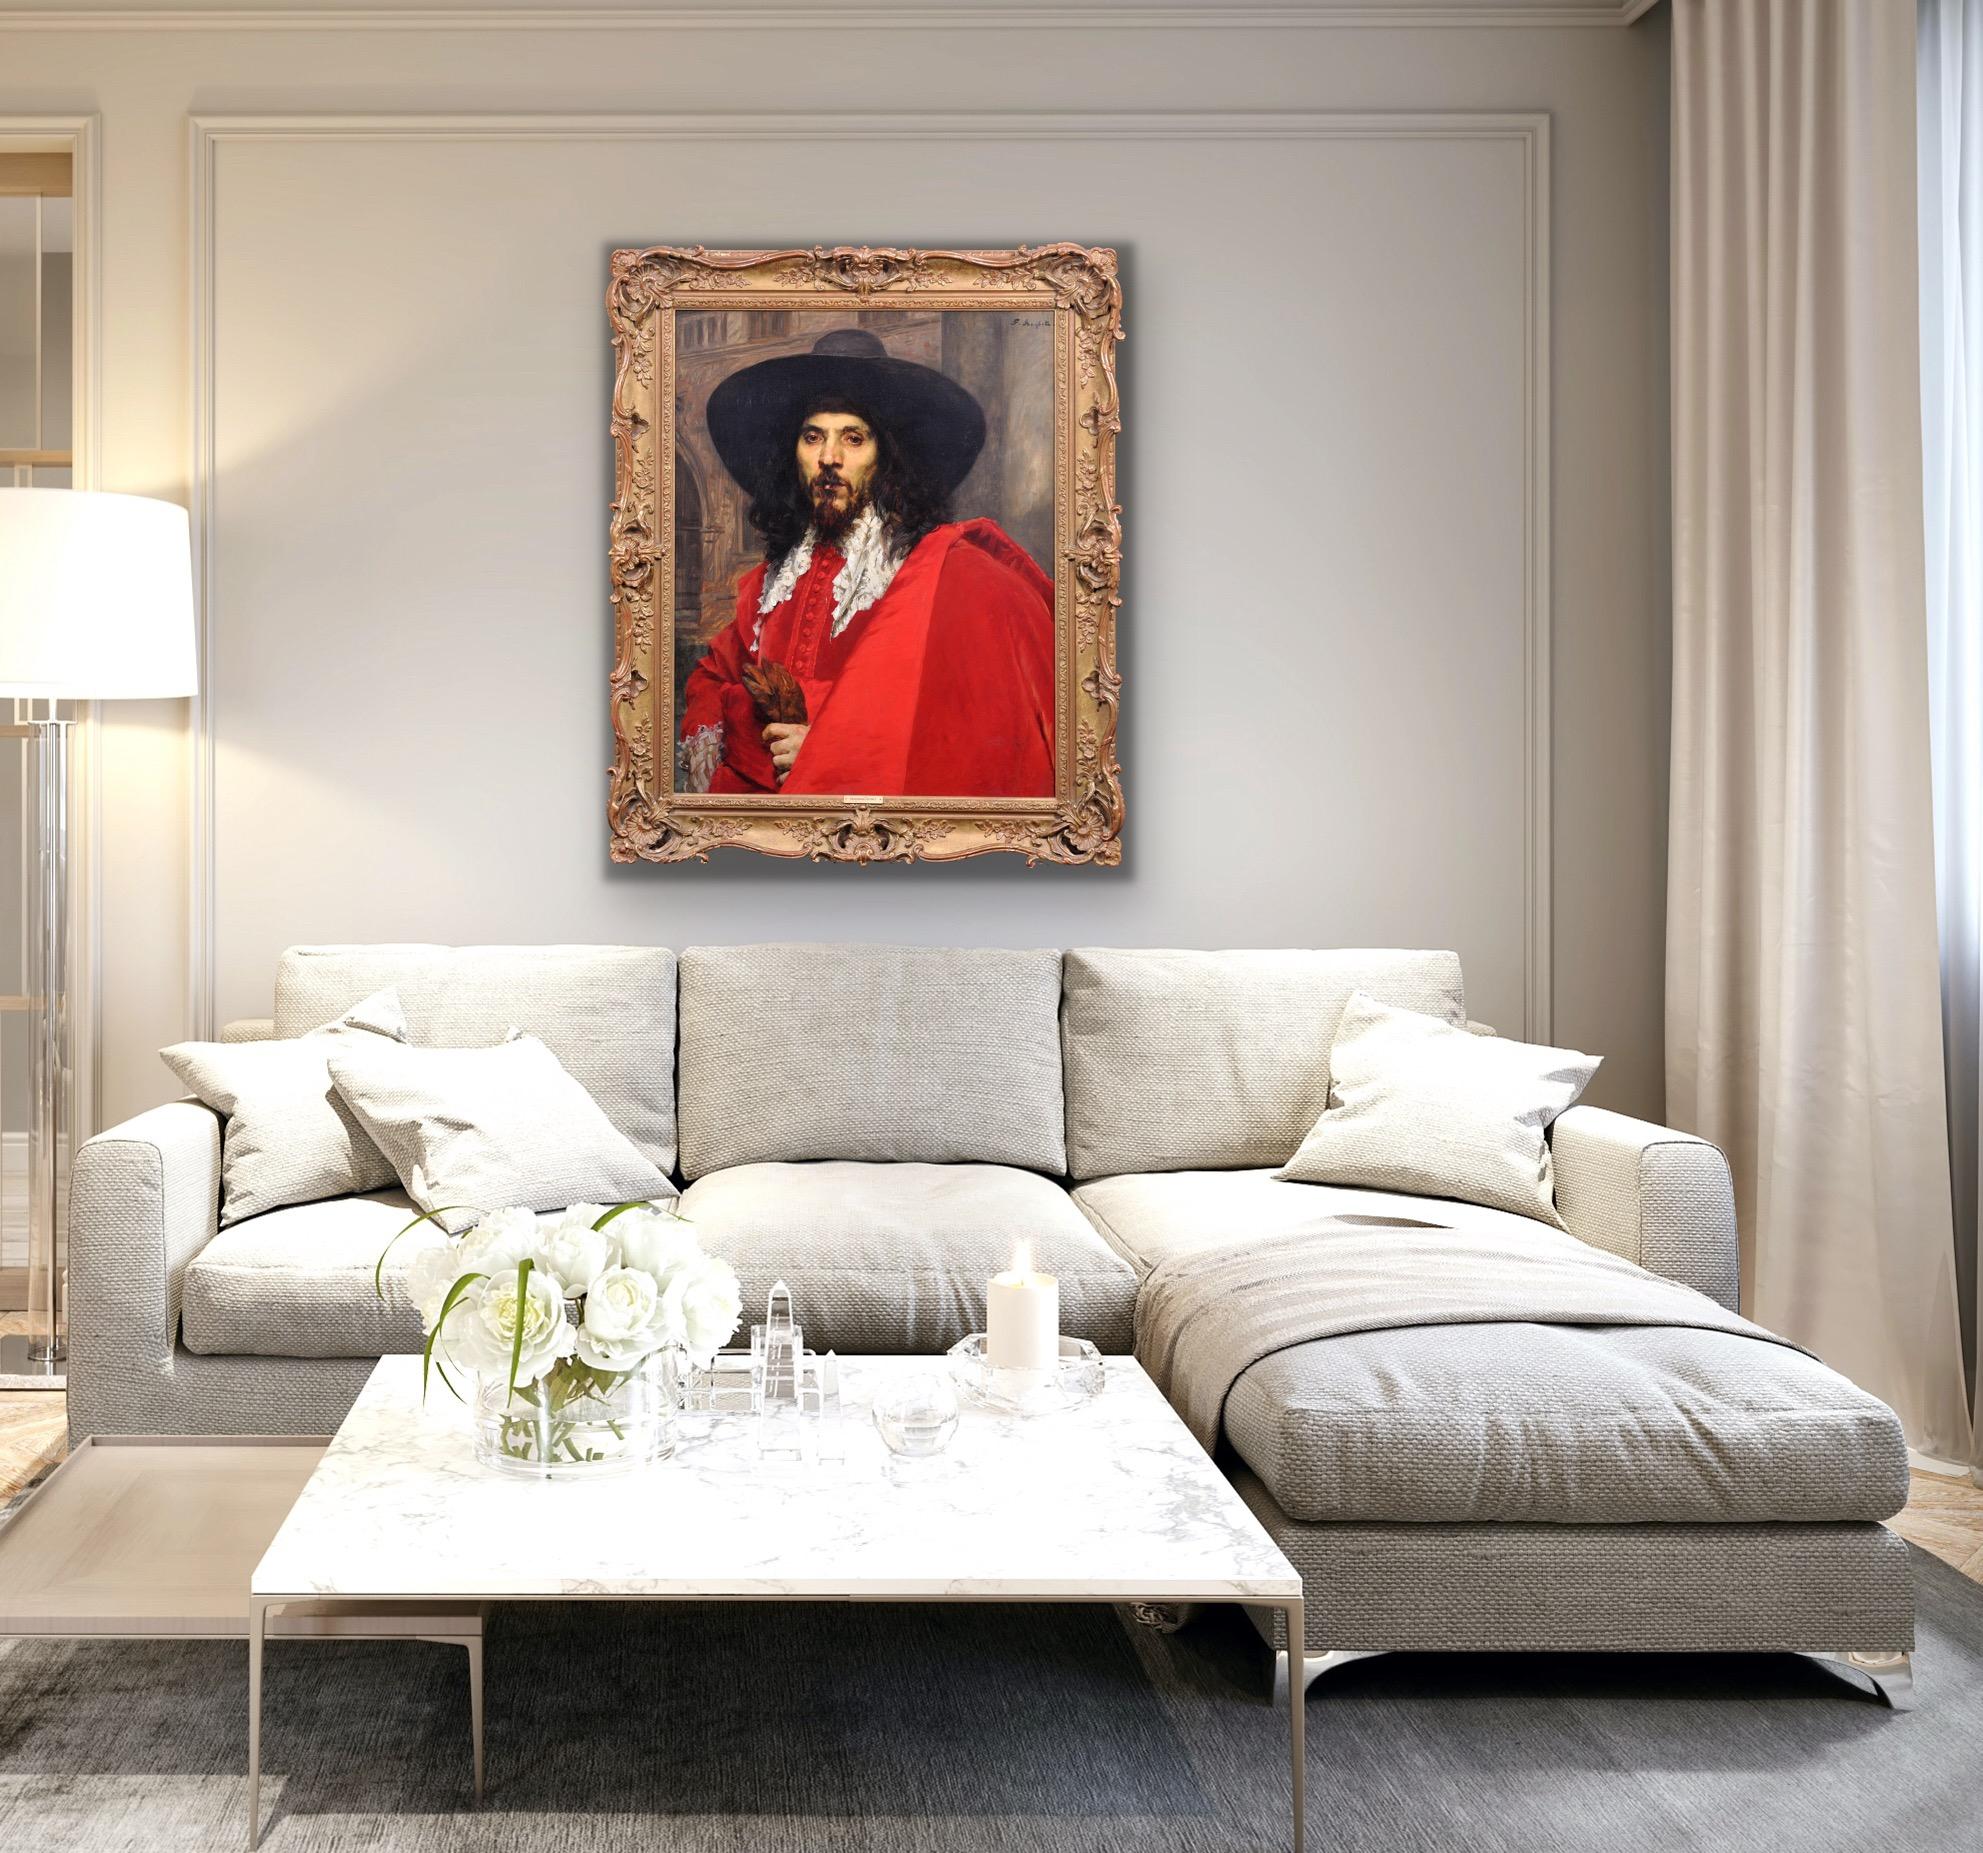 Le Mousquetaire.Musketeer.Cavalier.Spanish Tradition.Diego Velázquez Influence. For Sale 15